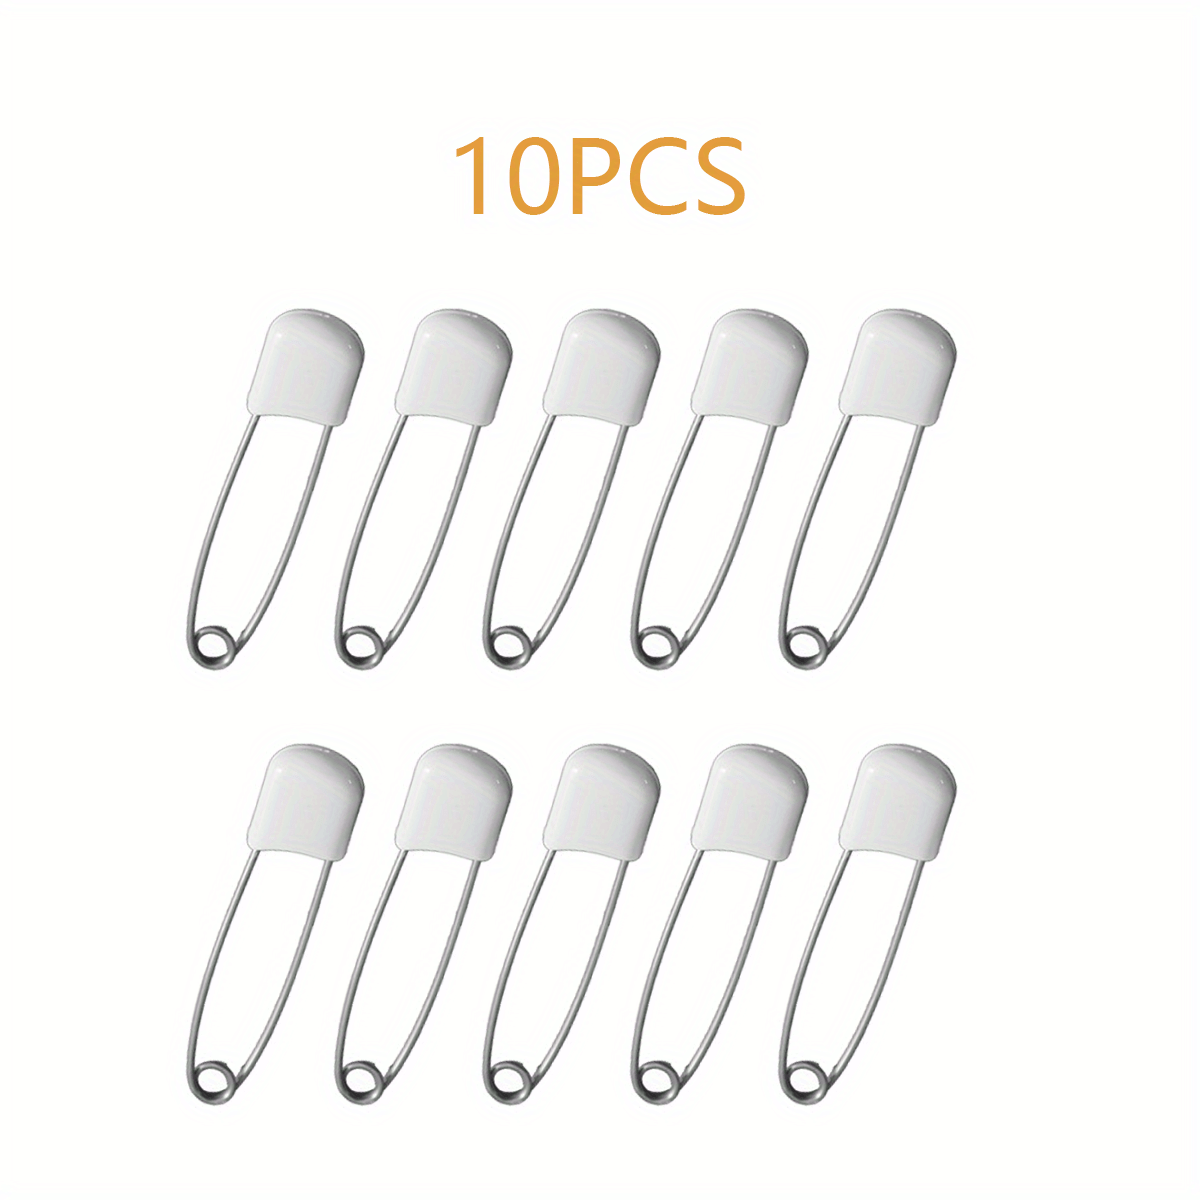 Hocansen 50 Pcs Safety Pin Diaper Pin Stainless Steel Cloth Pins Plastic Head Cloth Diaper Pins with Locking Closures,Colour Random 54MM/2.2 inch